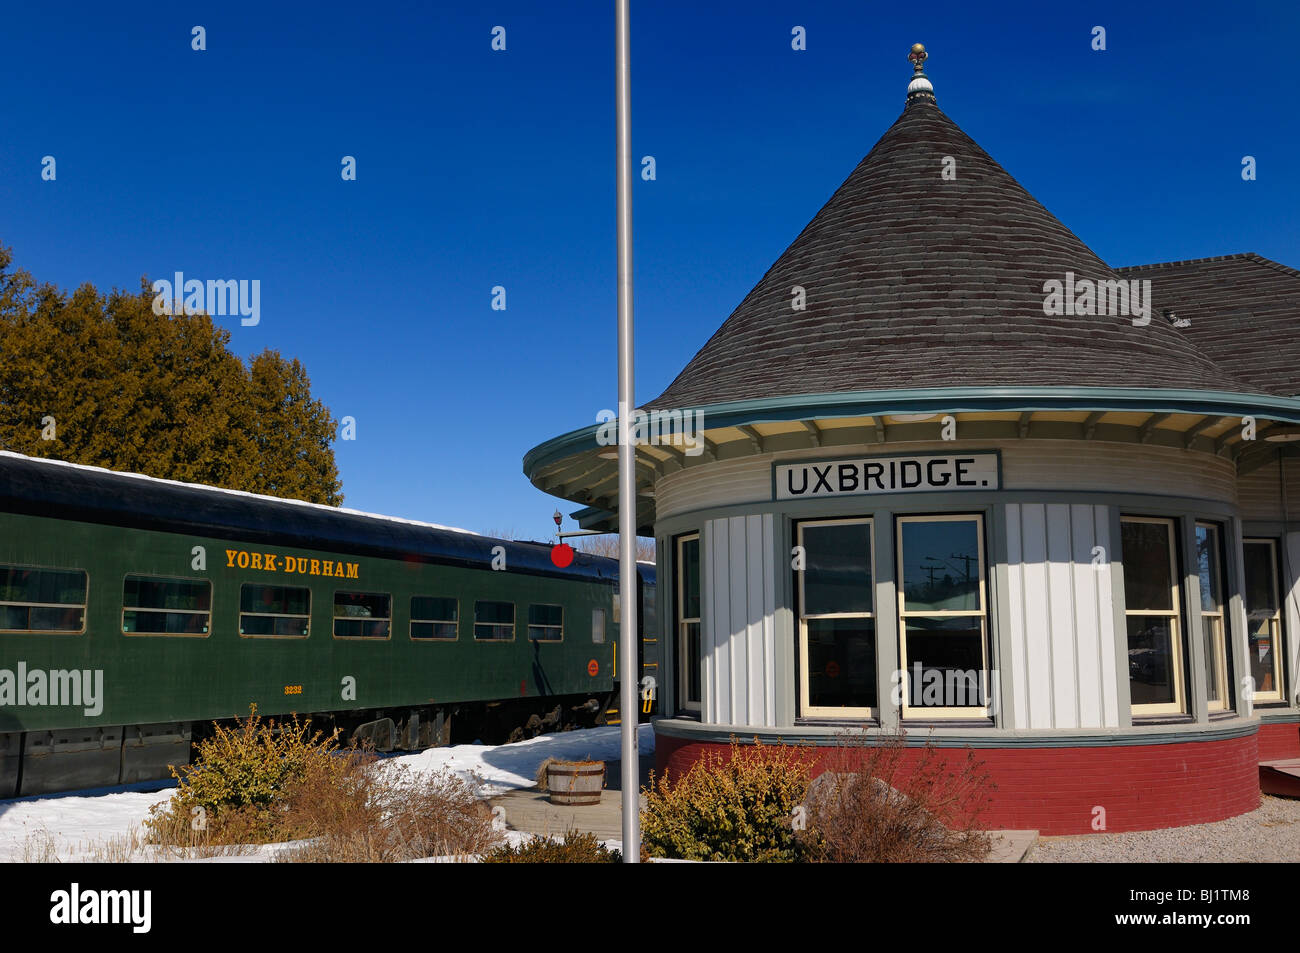 The York Durham Heritage Railway at the Uxbridge Ontario train station in winter with blue sky Stock Photo